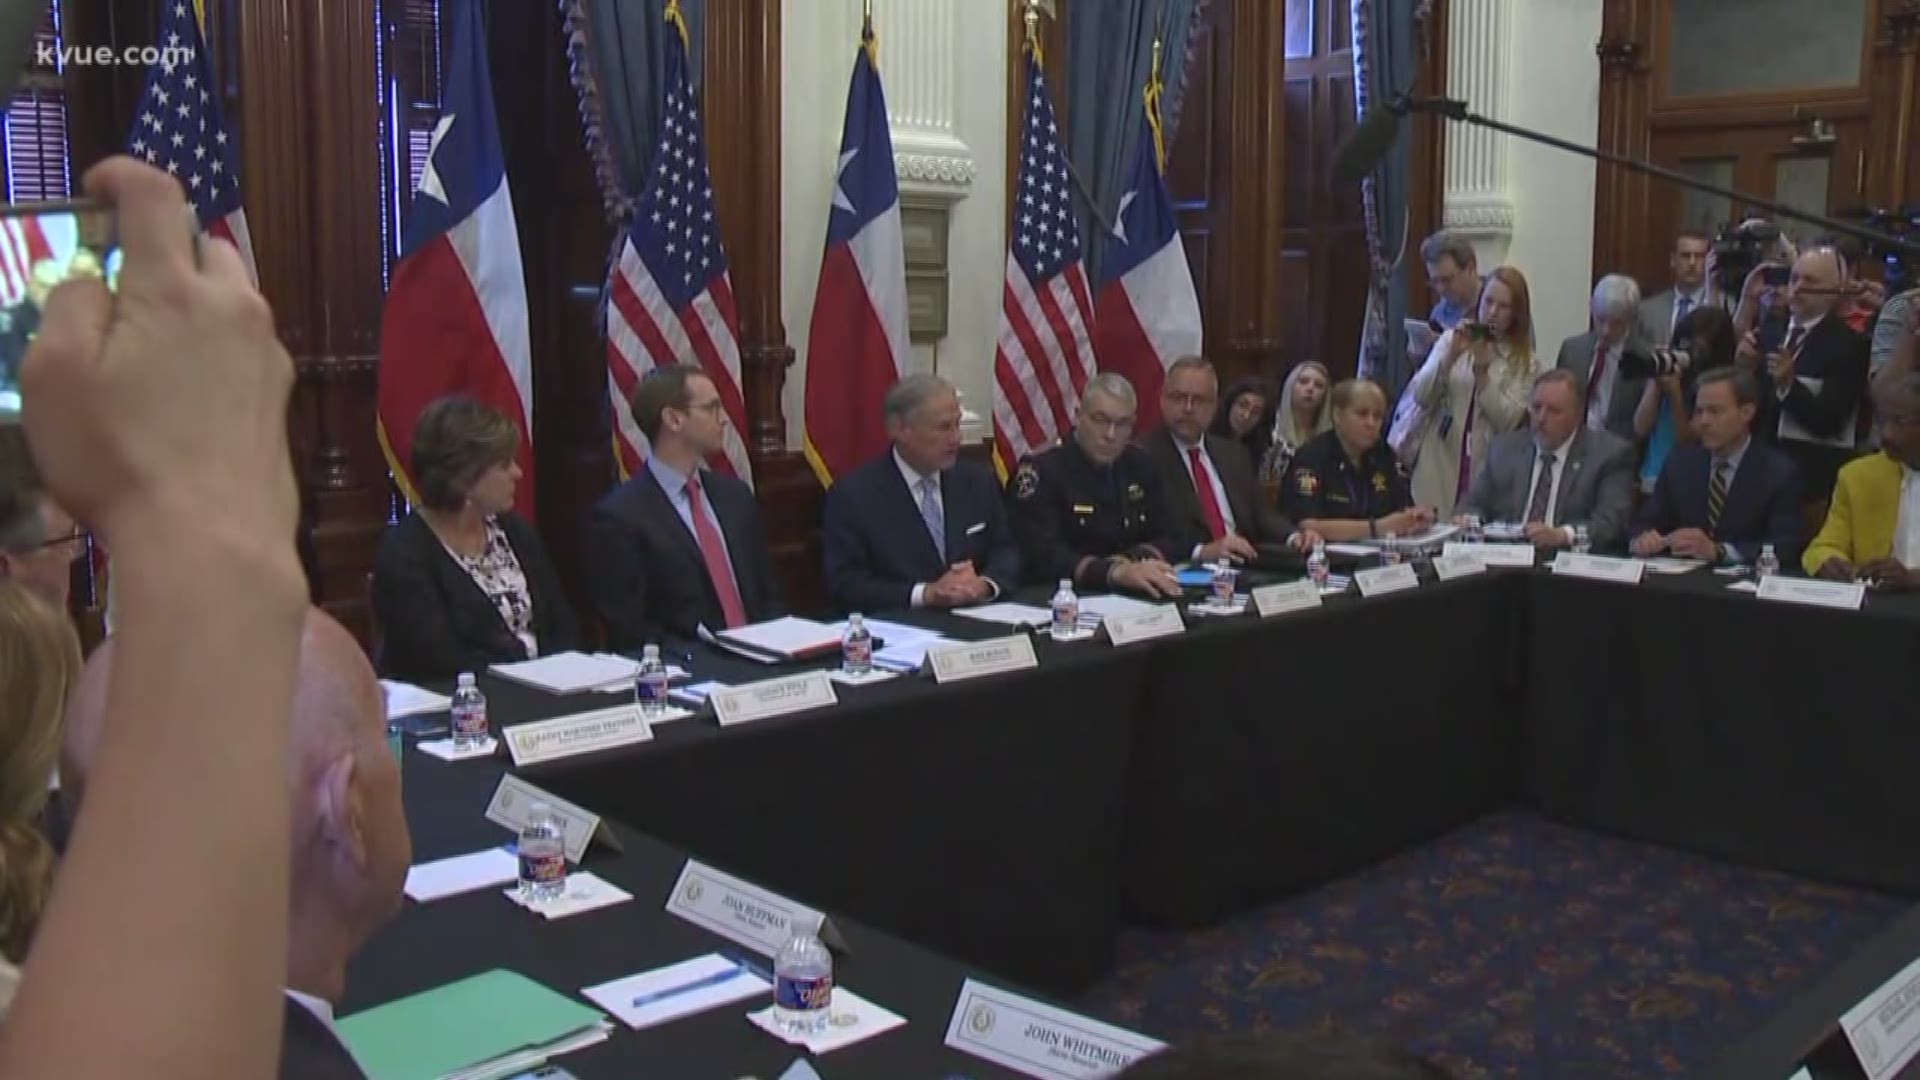 In response to the most recent school shooting in Santa Fe which left 10 dead and an additional 13 wounded, Gov. Gregg Abbott on Tuesday hosted the first of three roundtable events to evaluate solutions to gun violence in Texas.